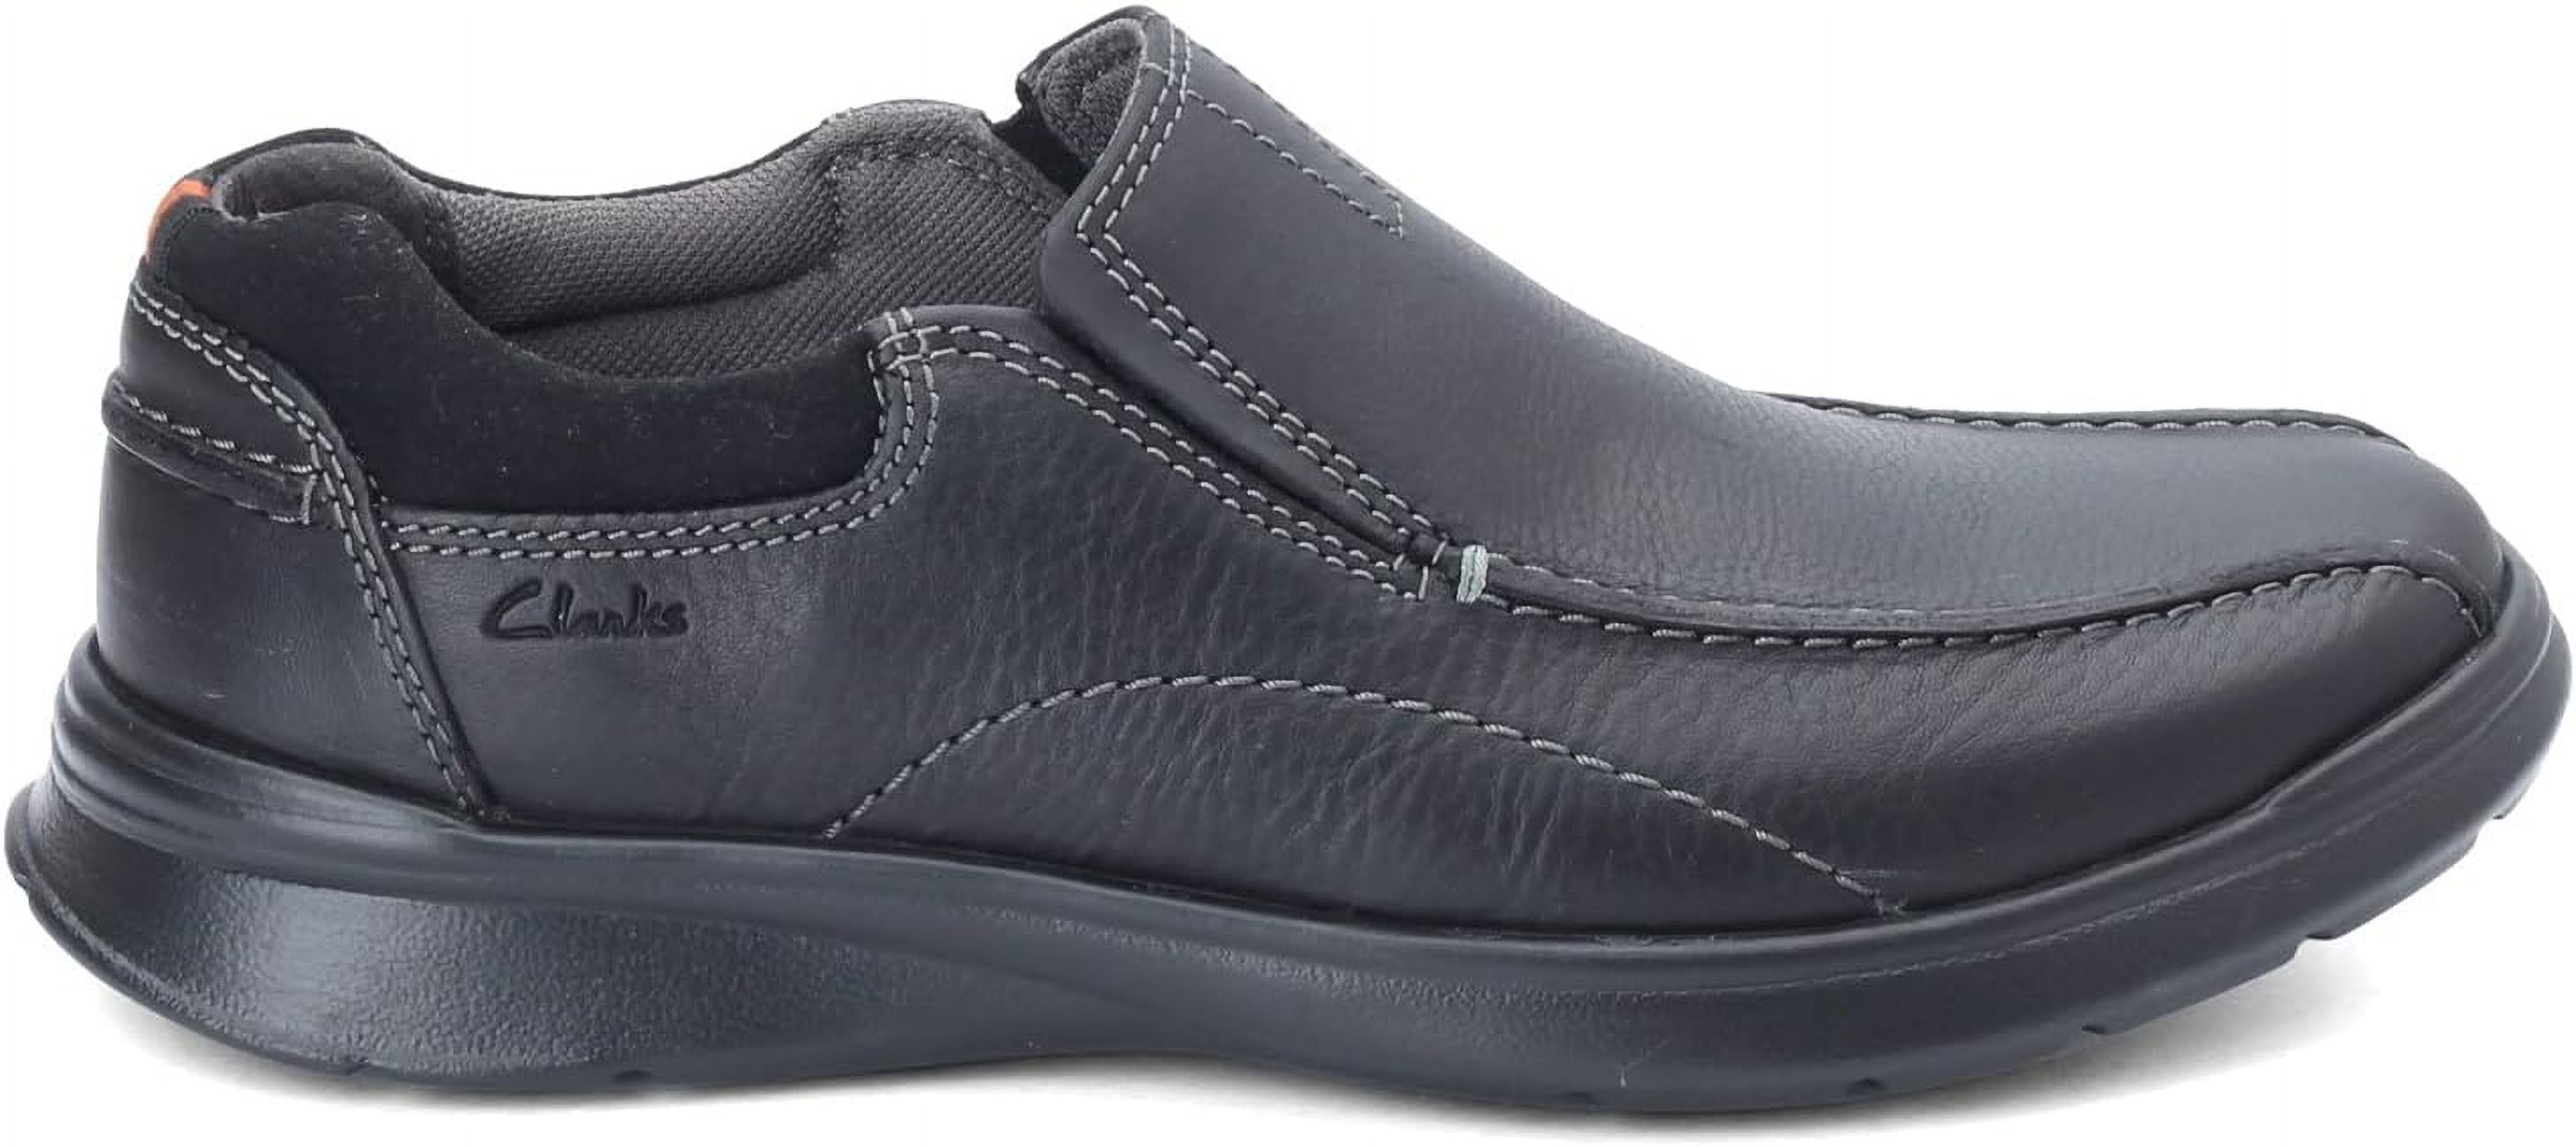 Men's Cotrell Step Bicycle Toe Shoe - image 2 of 7